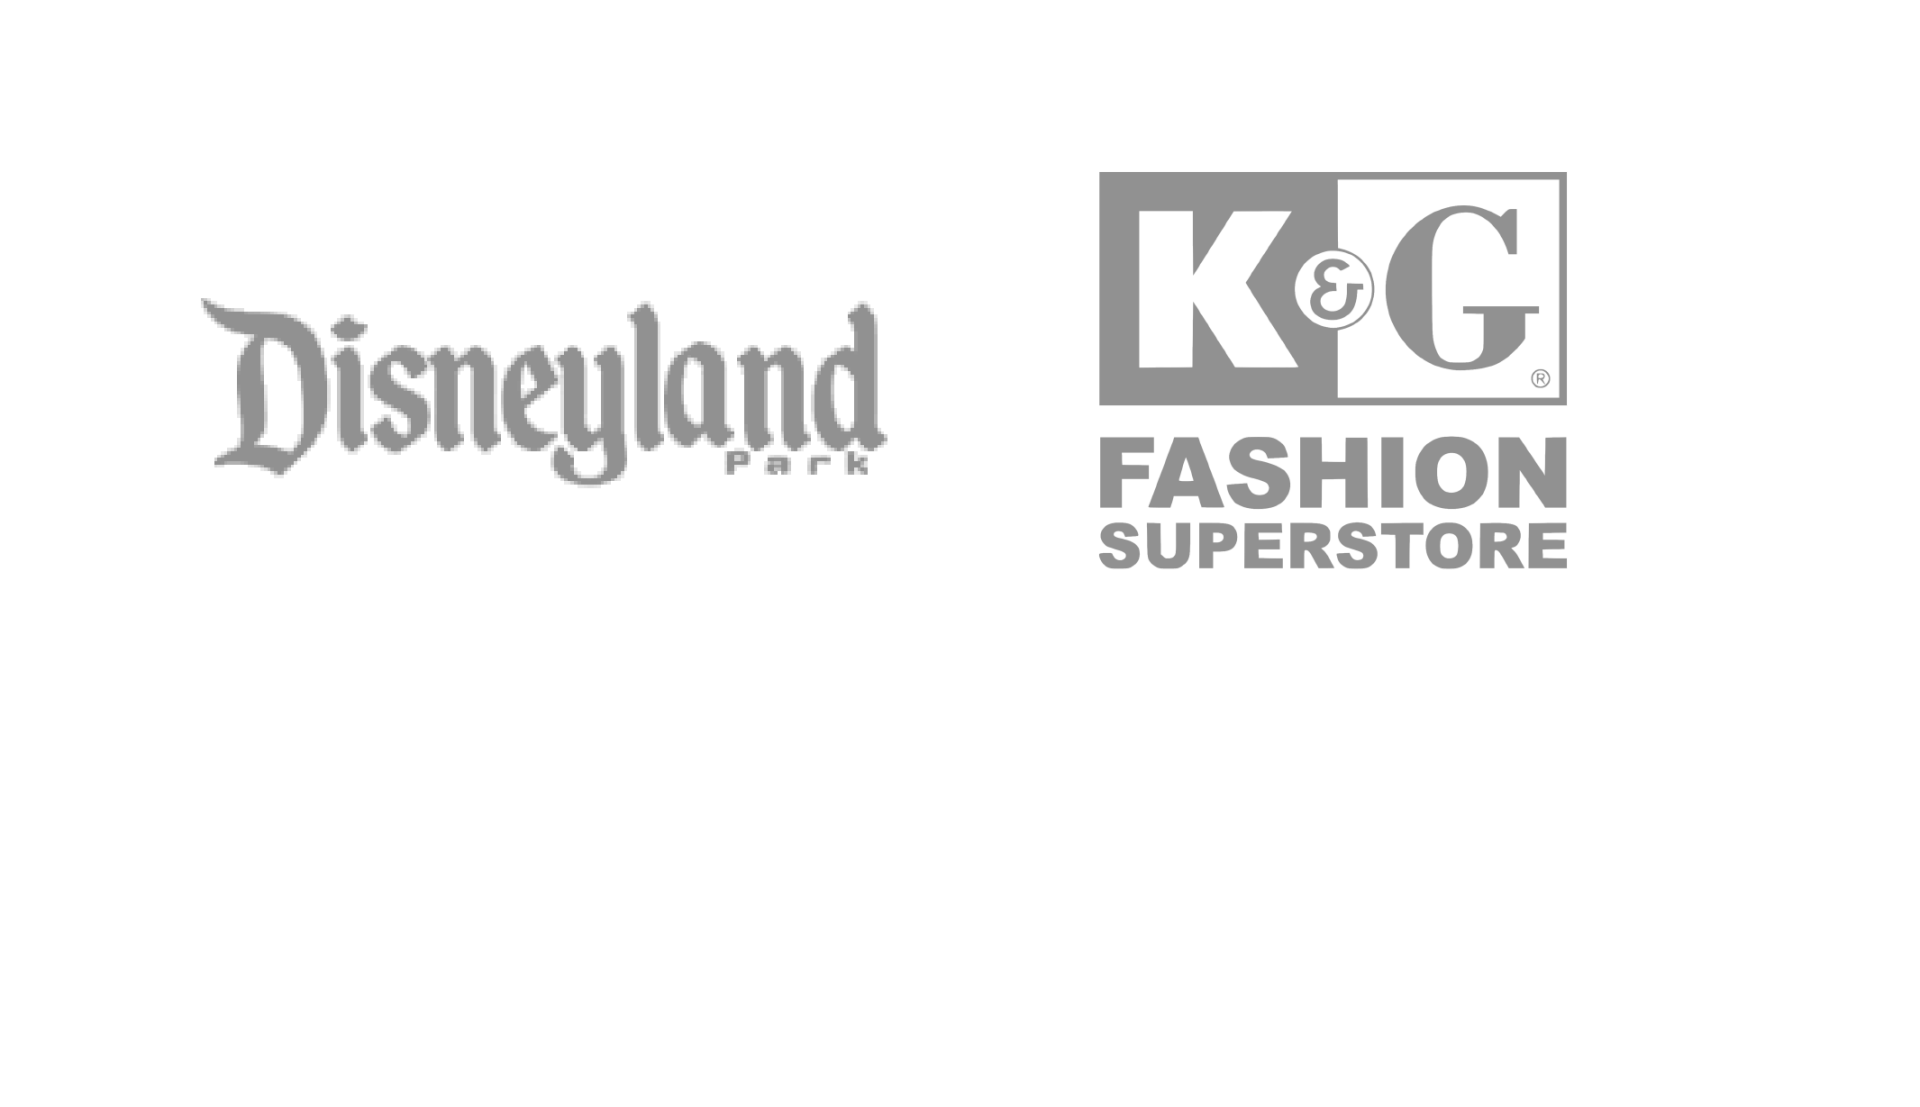 disneyland and kg fashion superstore logos on a white background .